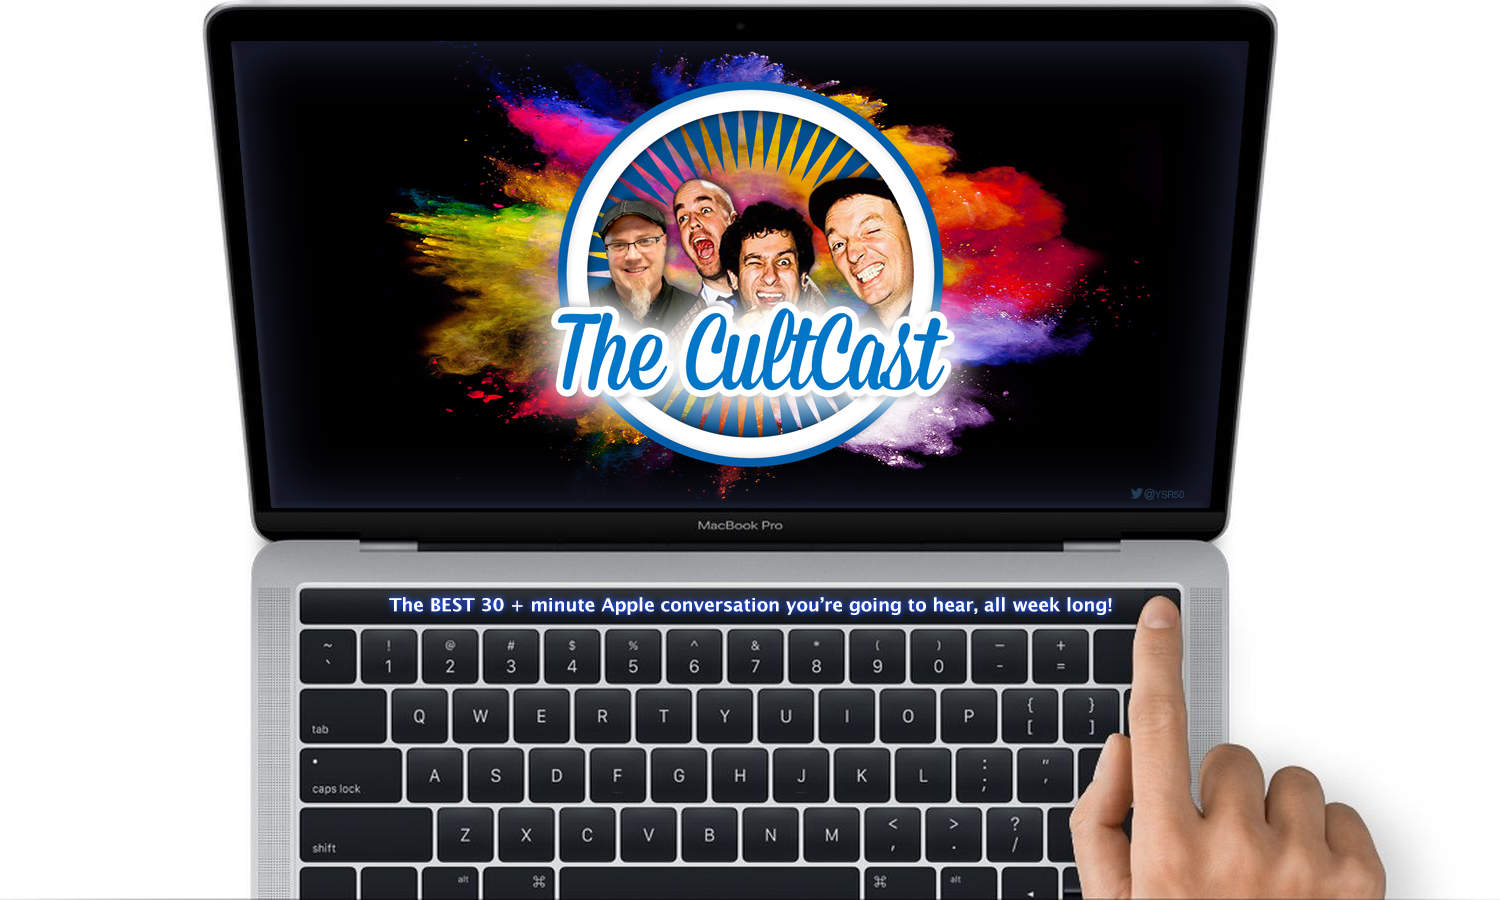 The reviews are in on Apple's new MacBook Pro with Touch Bar...